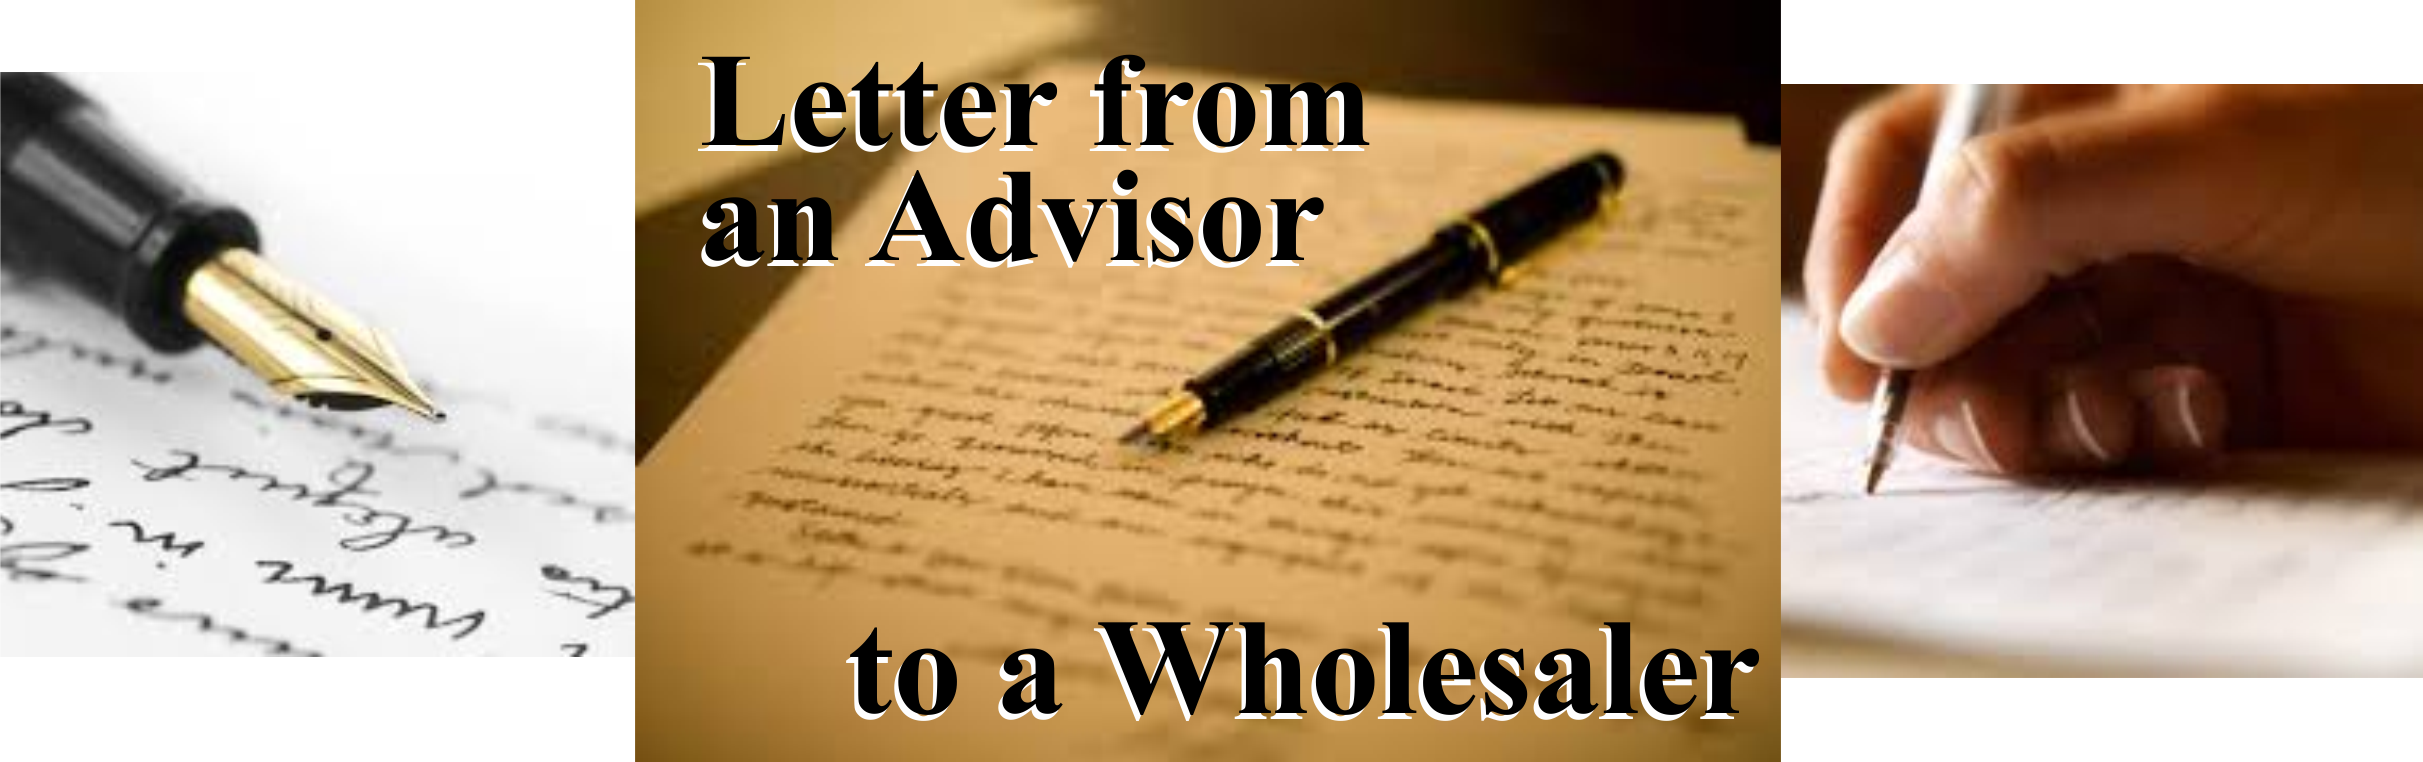 Letter from an Advisor to a Wholesaler